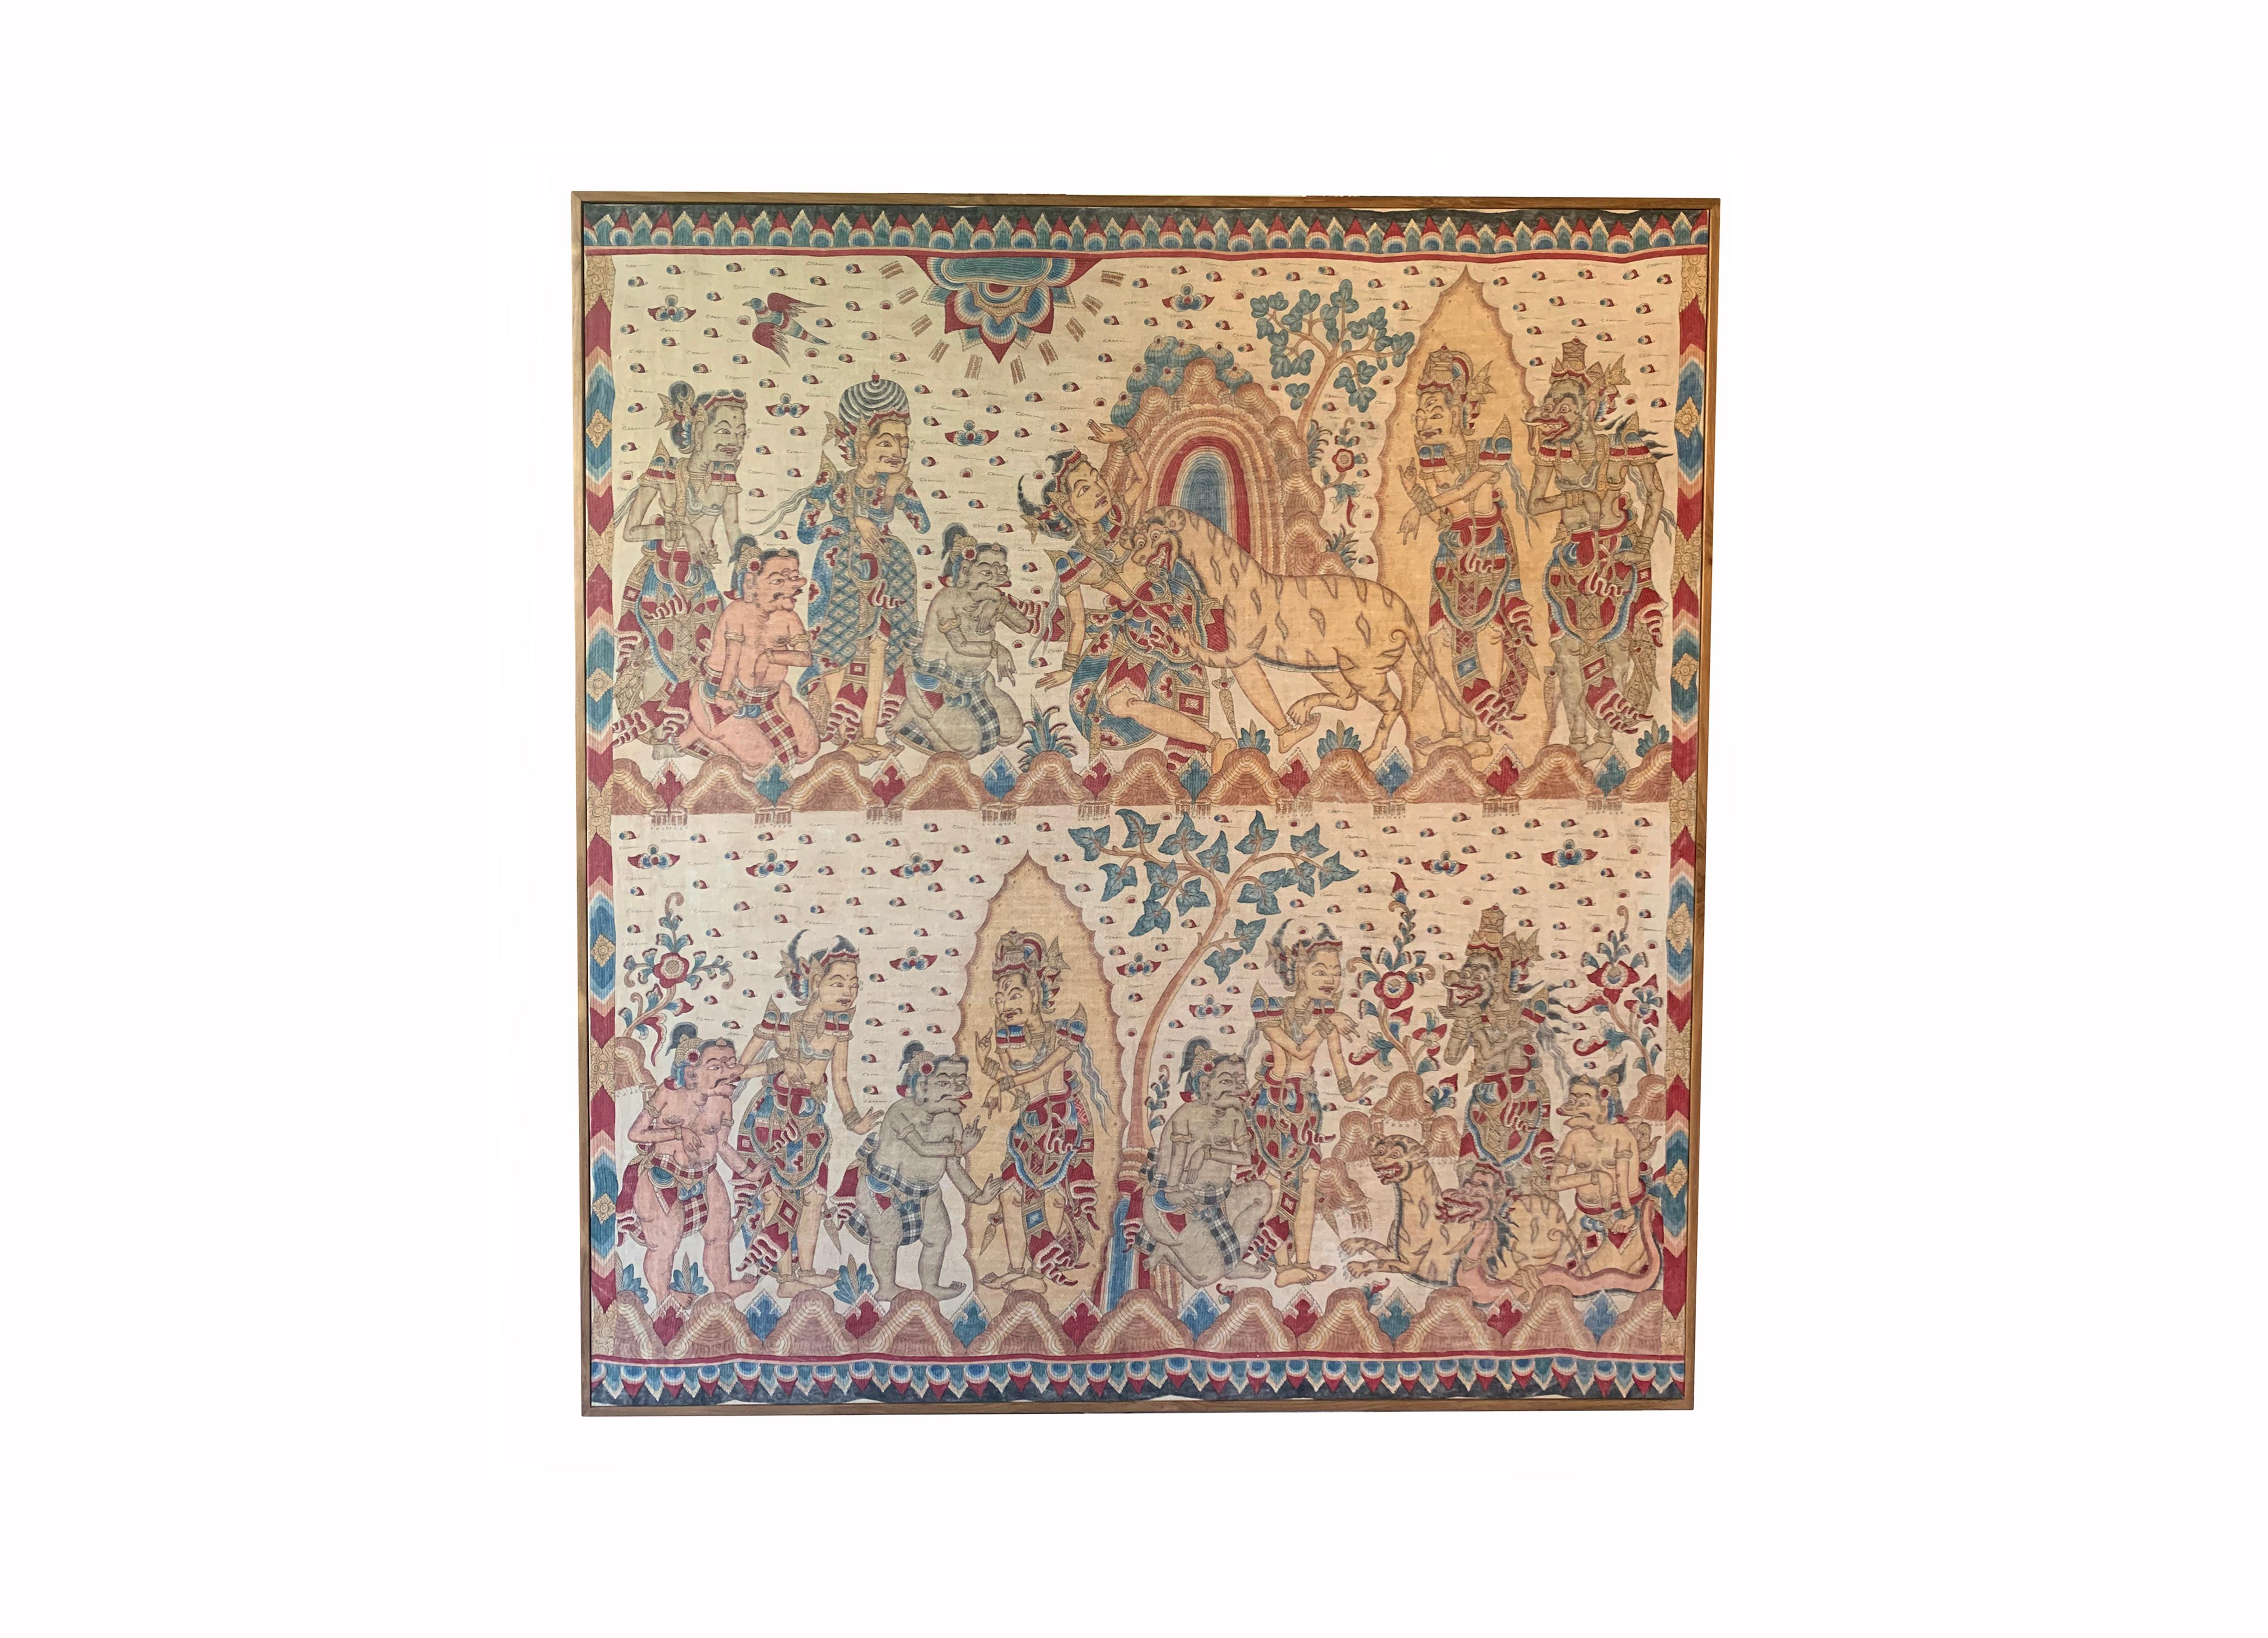 A mid-20th century 'Kamasan' cotton textile painting from Bali, Indonesia. The hand-painted image has great detail and depicts Balinese Hindu mythology. Key features of this image are the large tiger and 